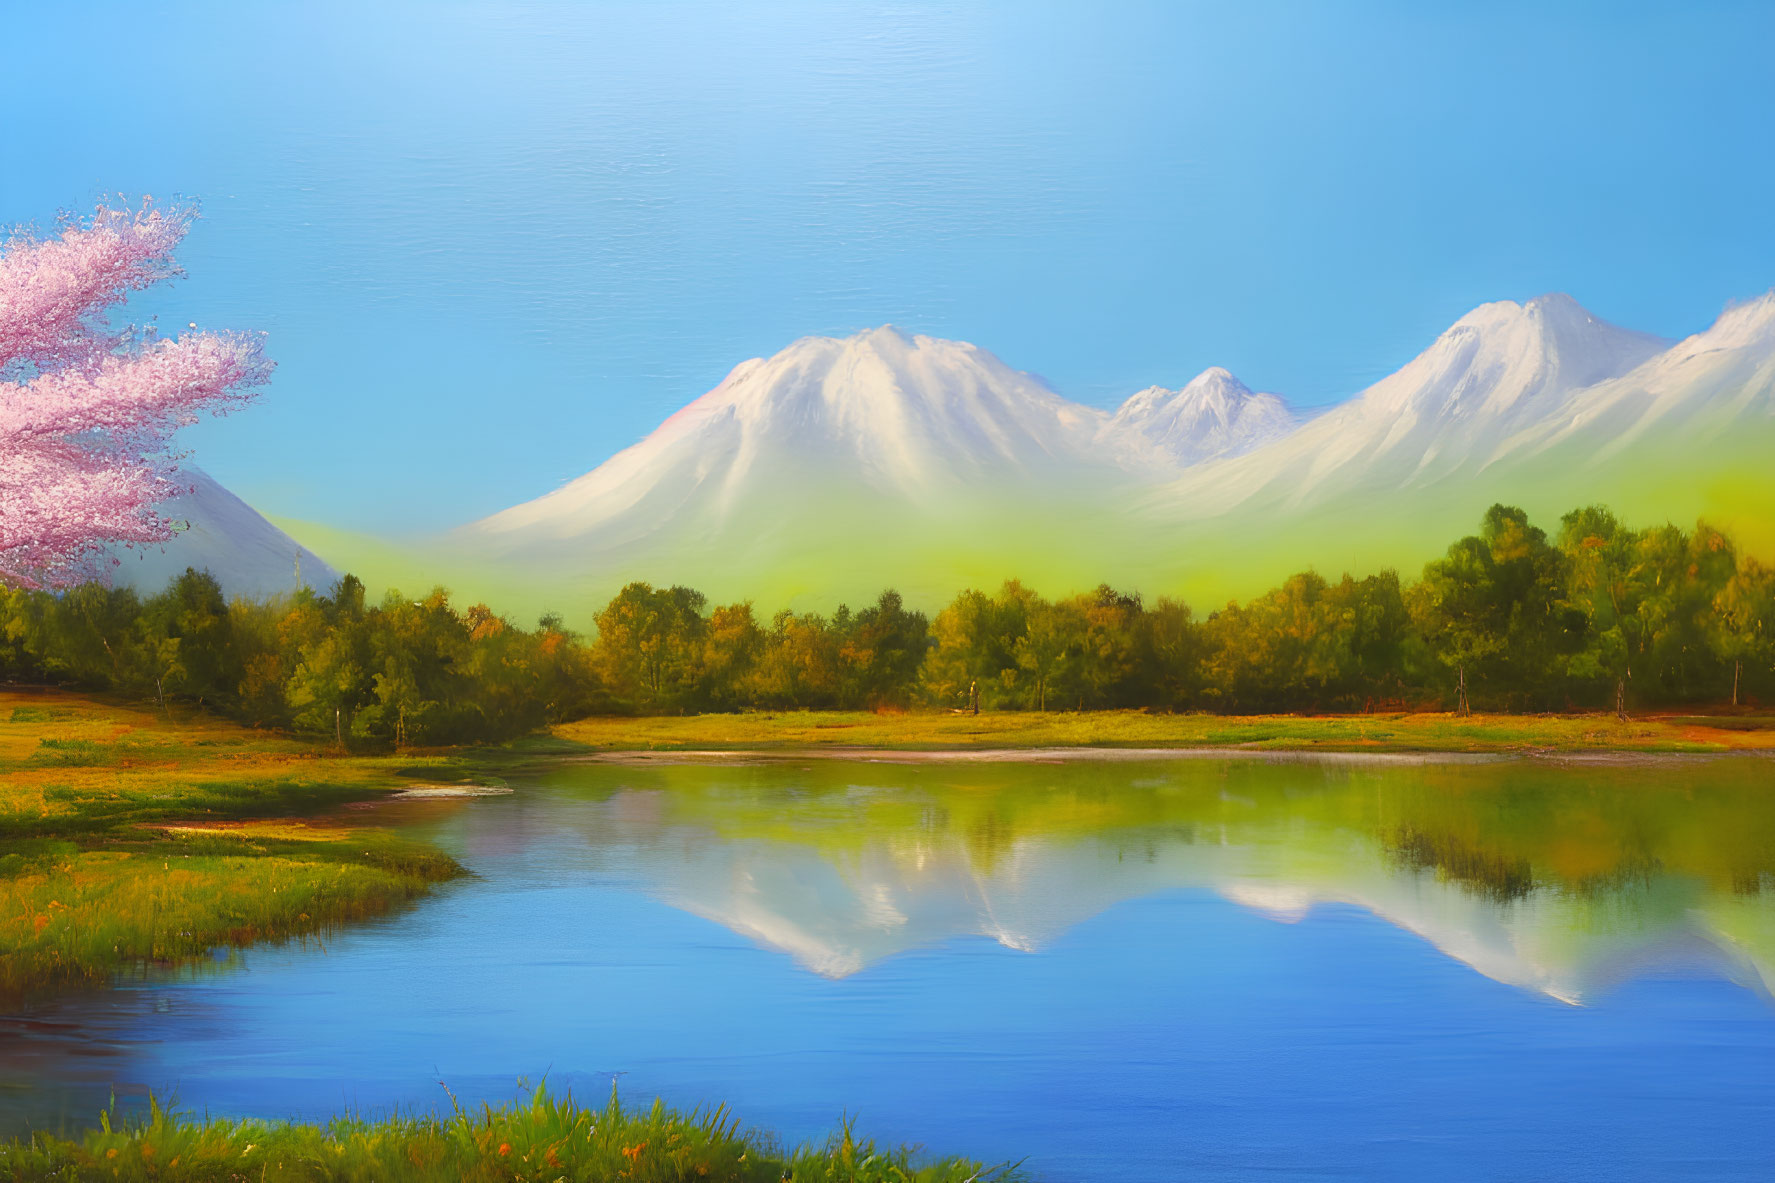 Snow-capped mountains, blossoming tree, lake, and blue sky in tranquil landscape.